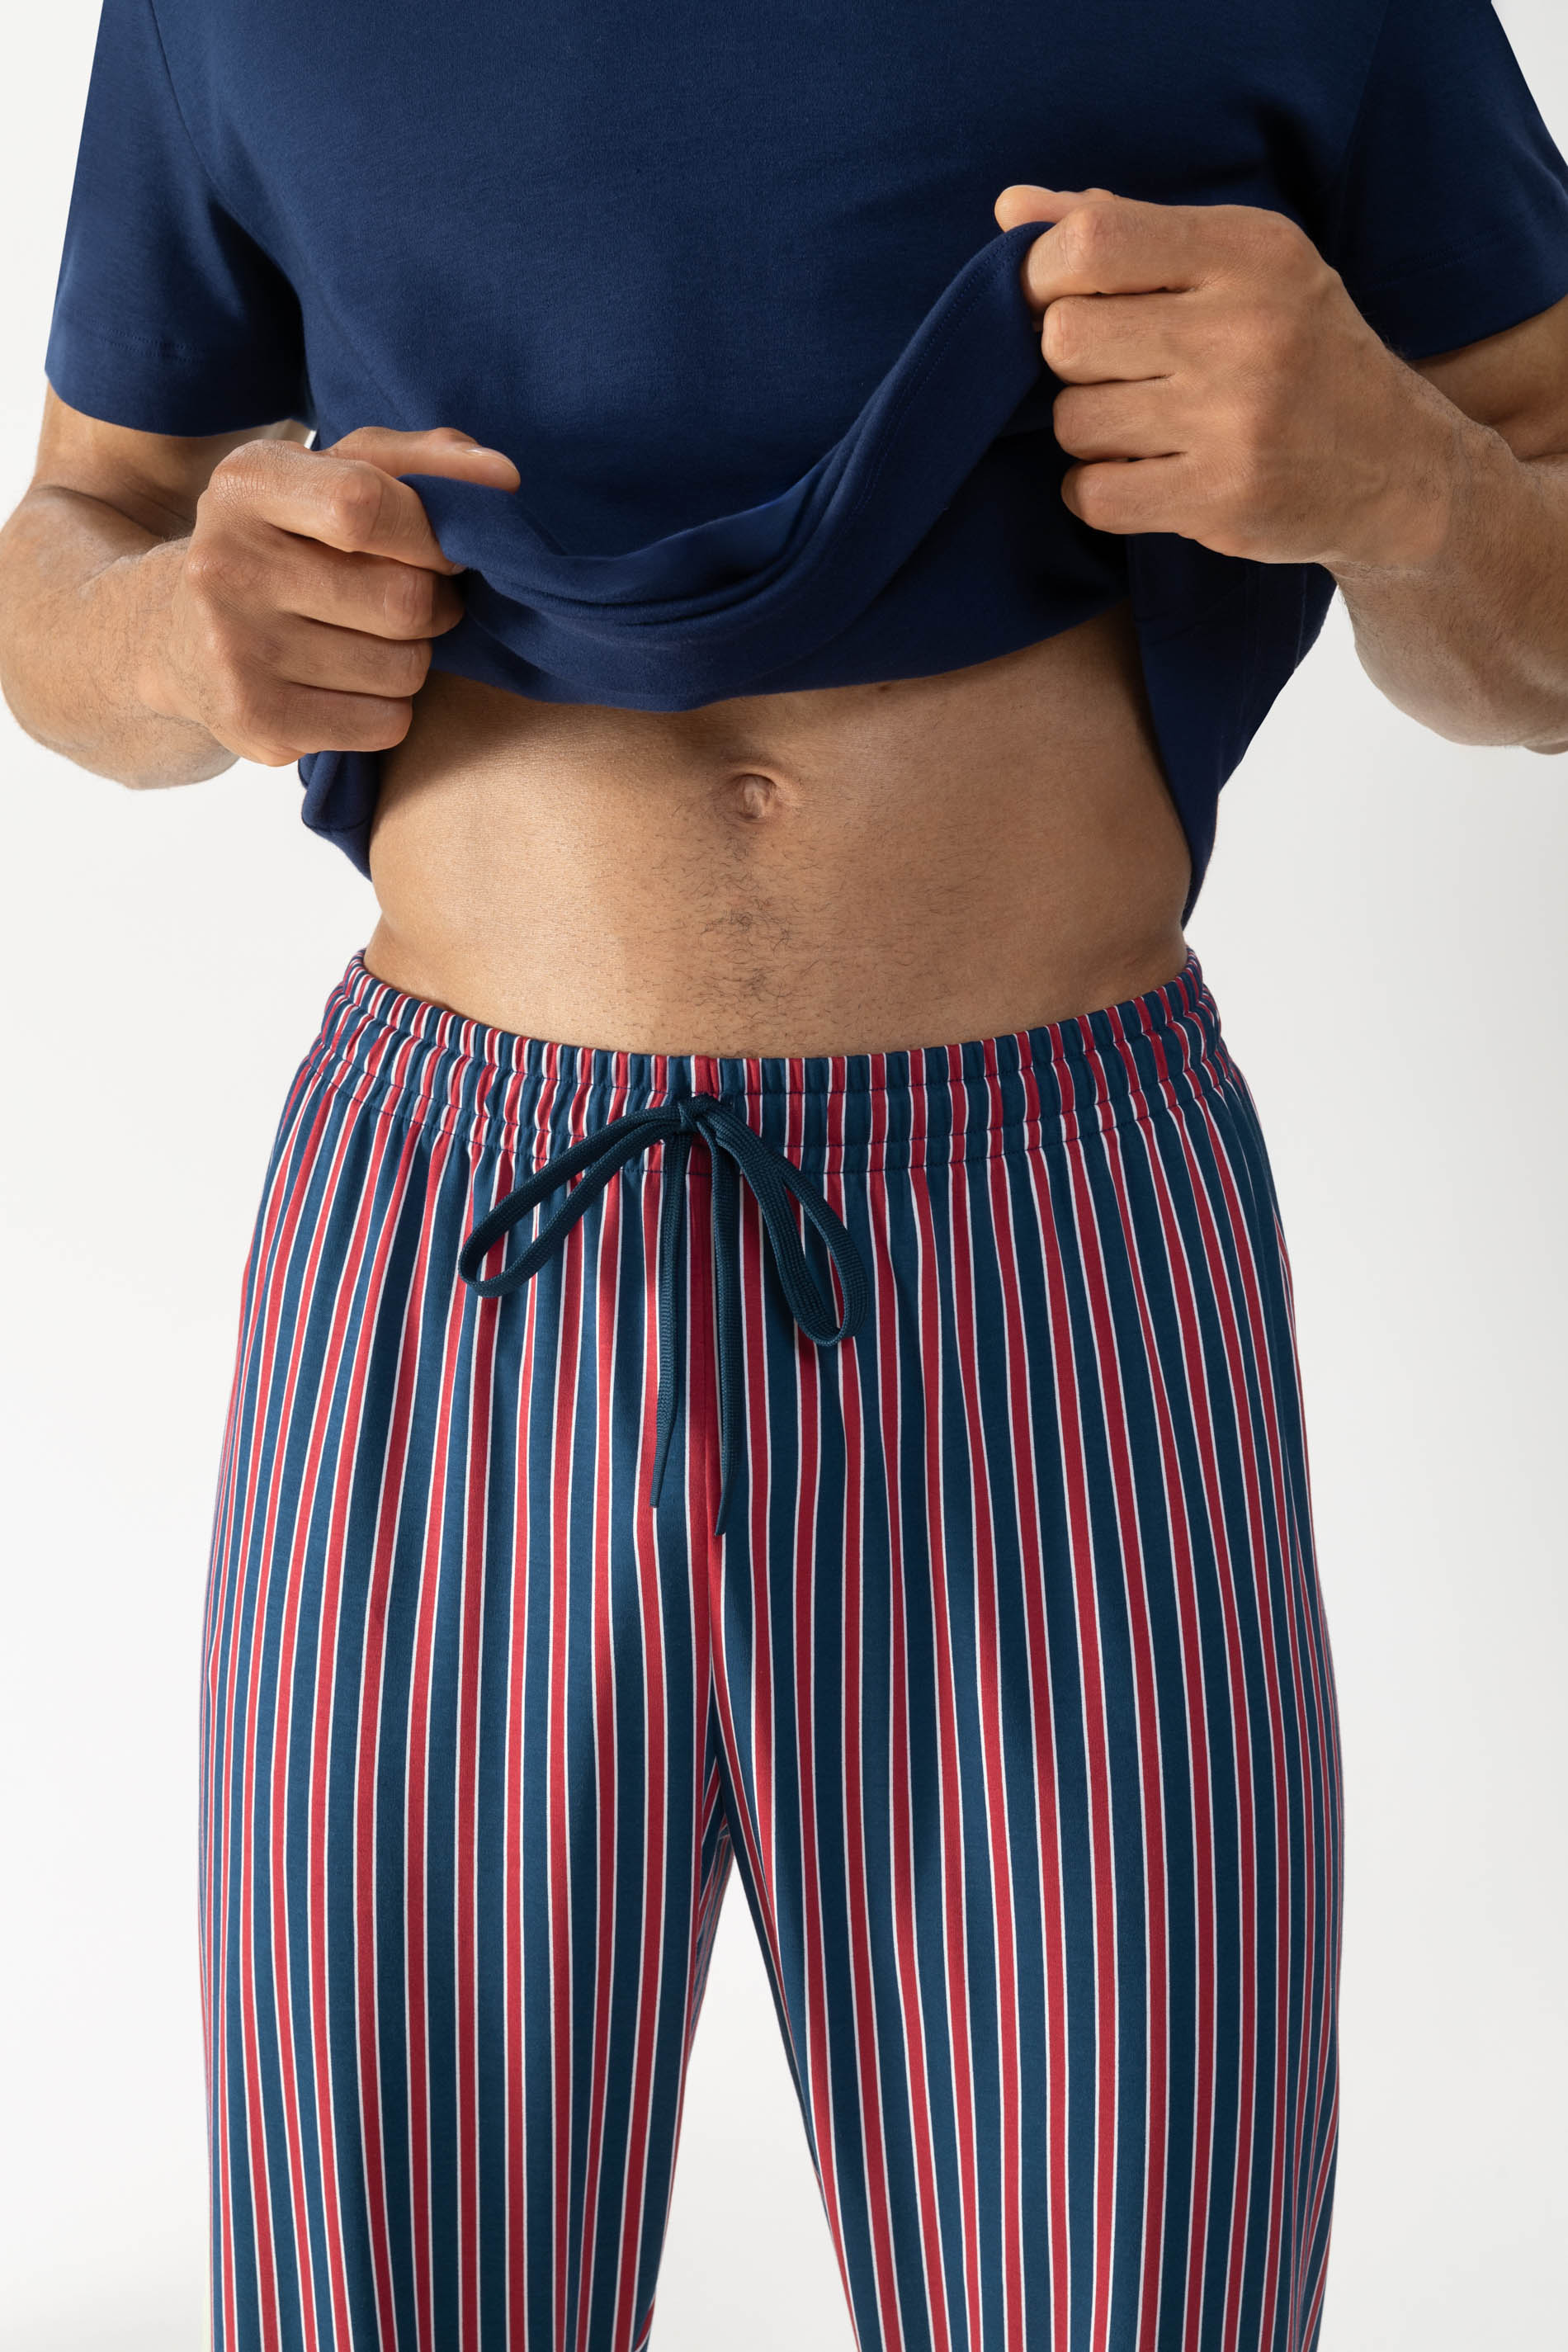 Long bottoms Serie Graphic Stripes Detail View 01 | mey®